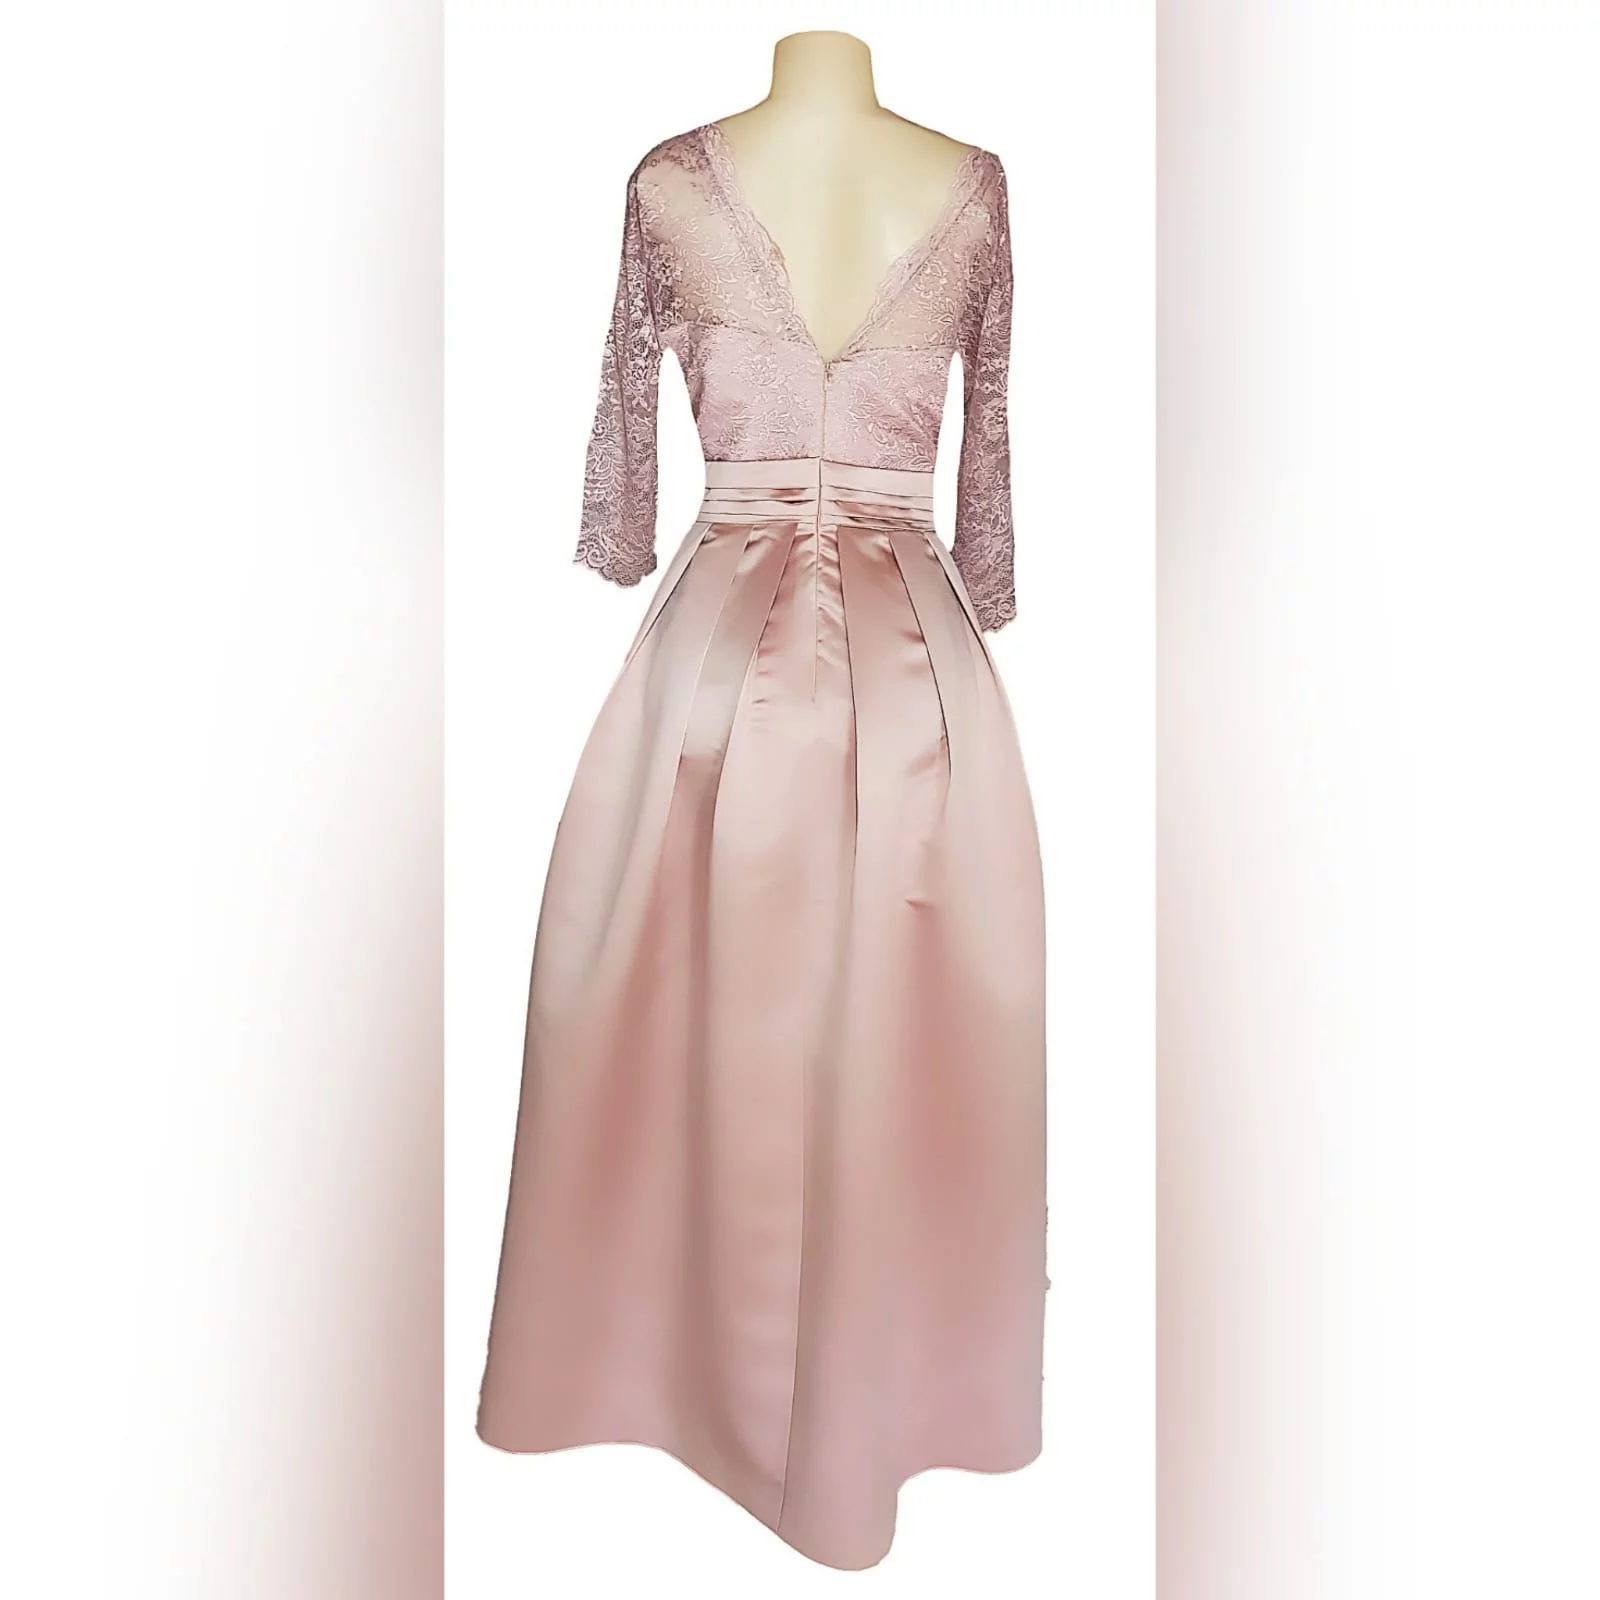 Formal evening dress in dusty pink 5 this dress was created for a wedding ceremony. A formal evening dress in dusty pink. With a lace bodice and 3/4 lace sleeves. With a v neckline. Bottom in a satin, pleated, with a pleated belt and pockets.